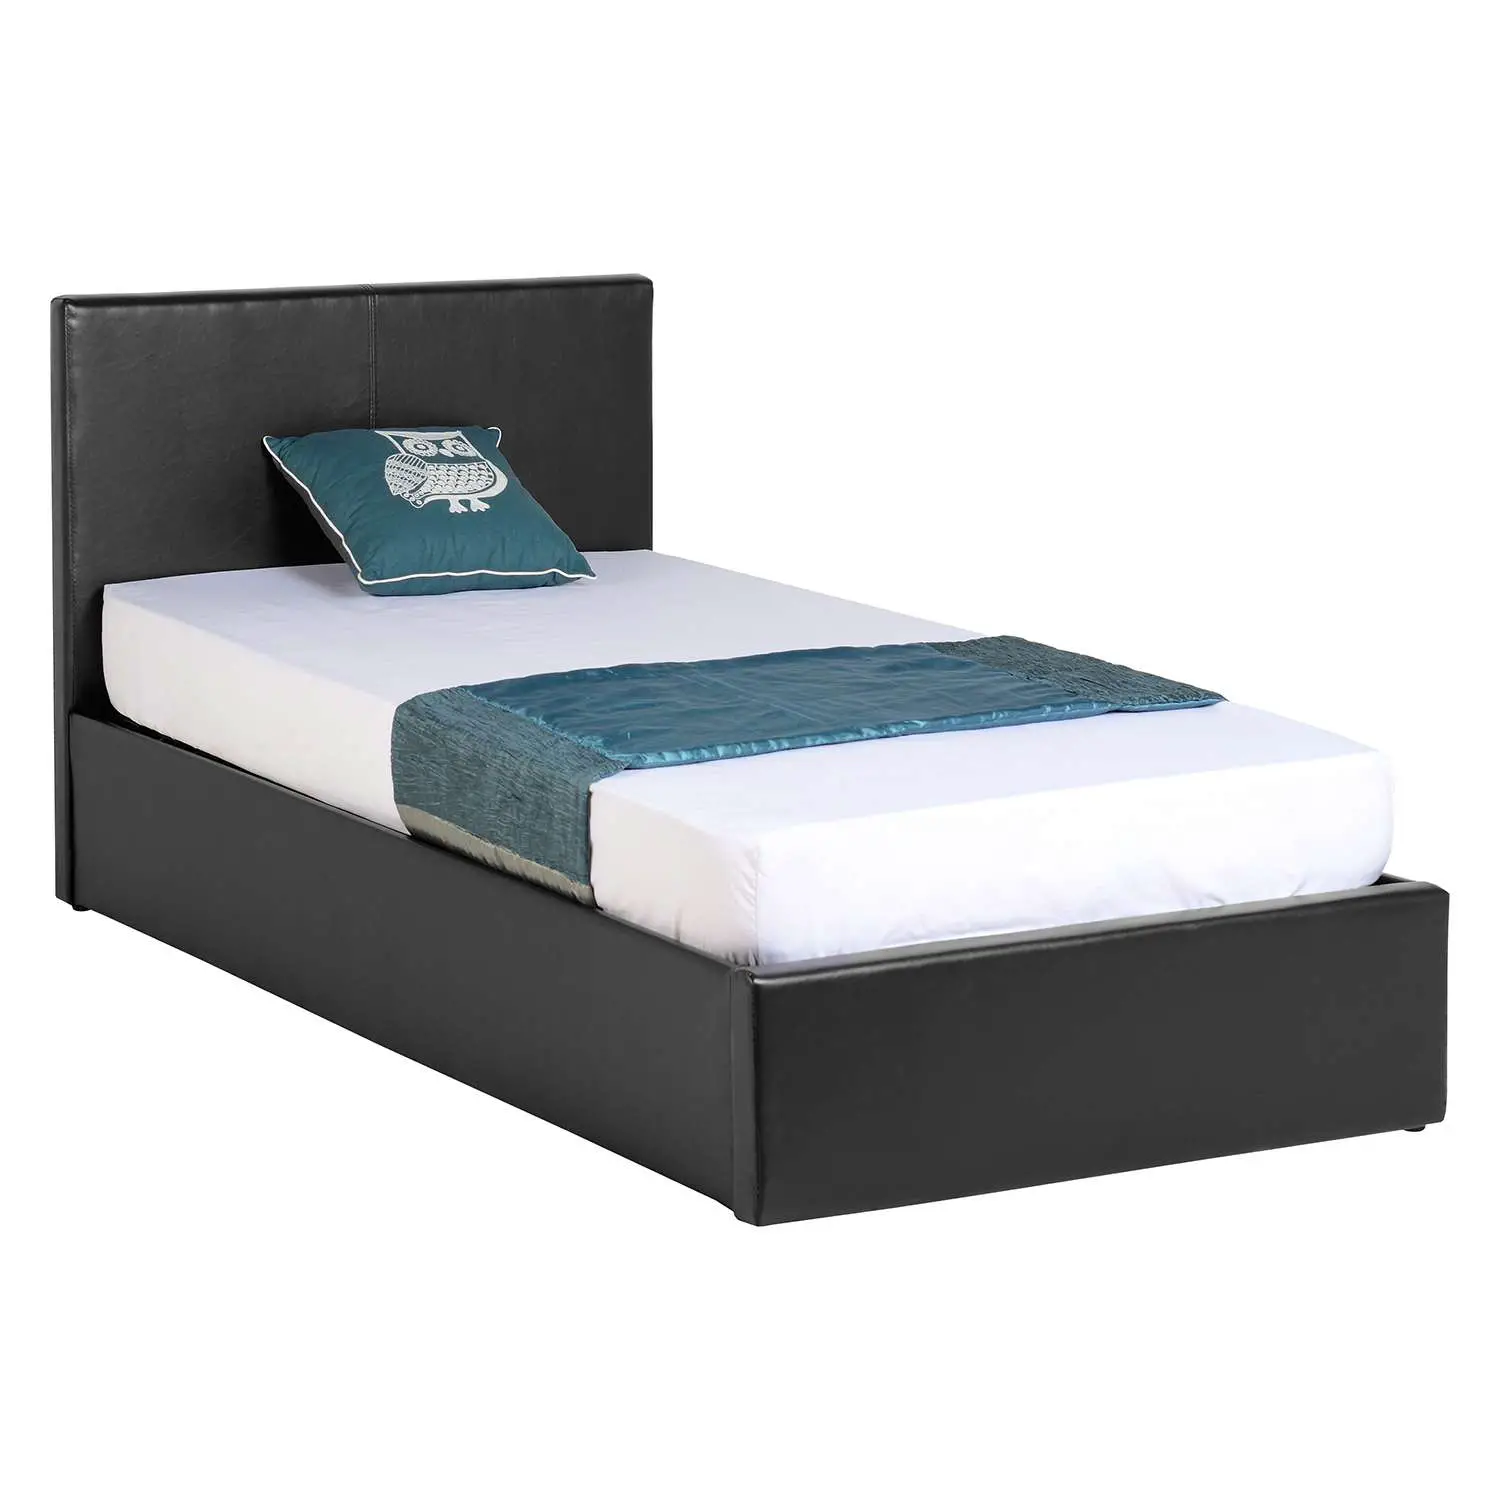 Appealing Bed Price King Size Sleep Number Cost Room ...